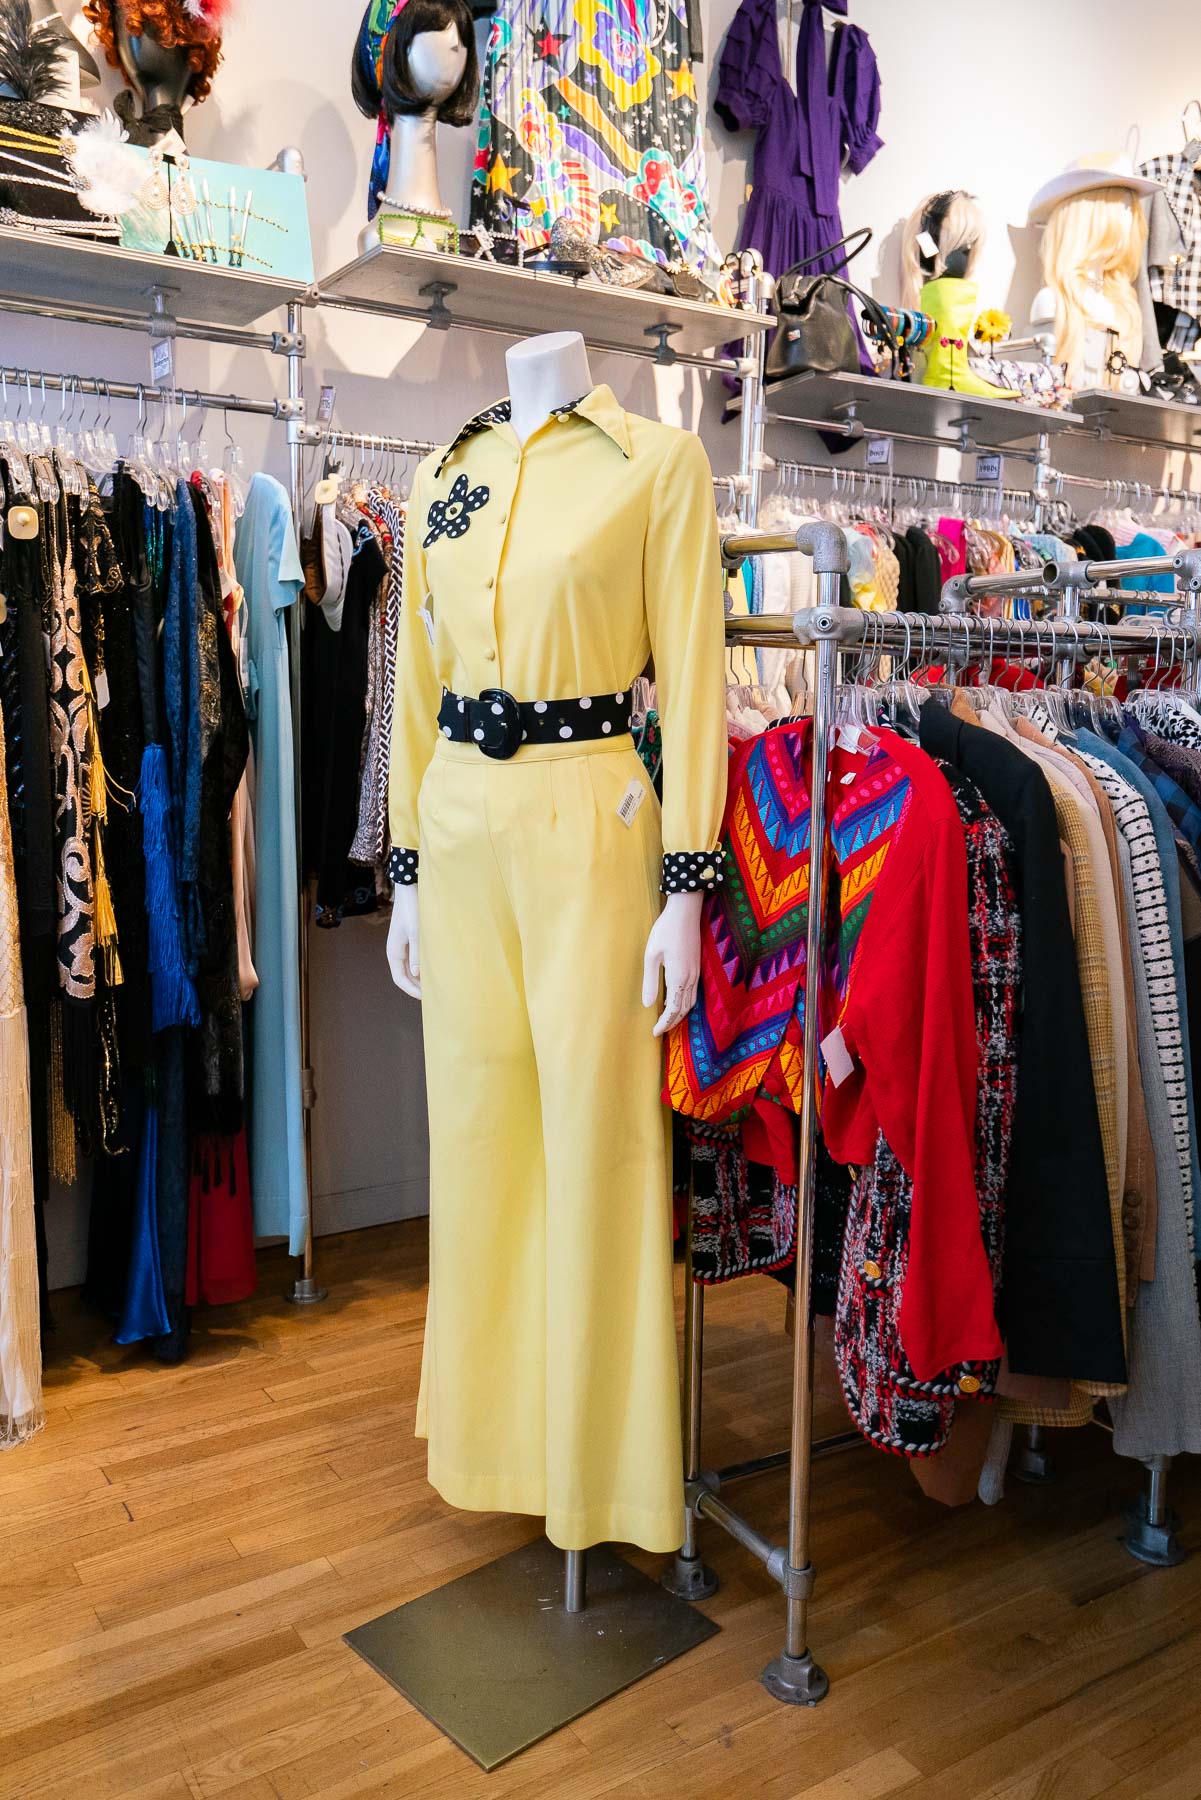 A yellow outfit with black belt on a mannequin at Screaming Mimi's Vintage, with clothing racks behind it